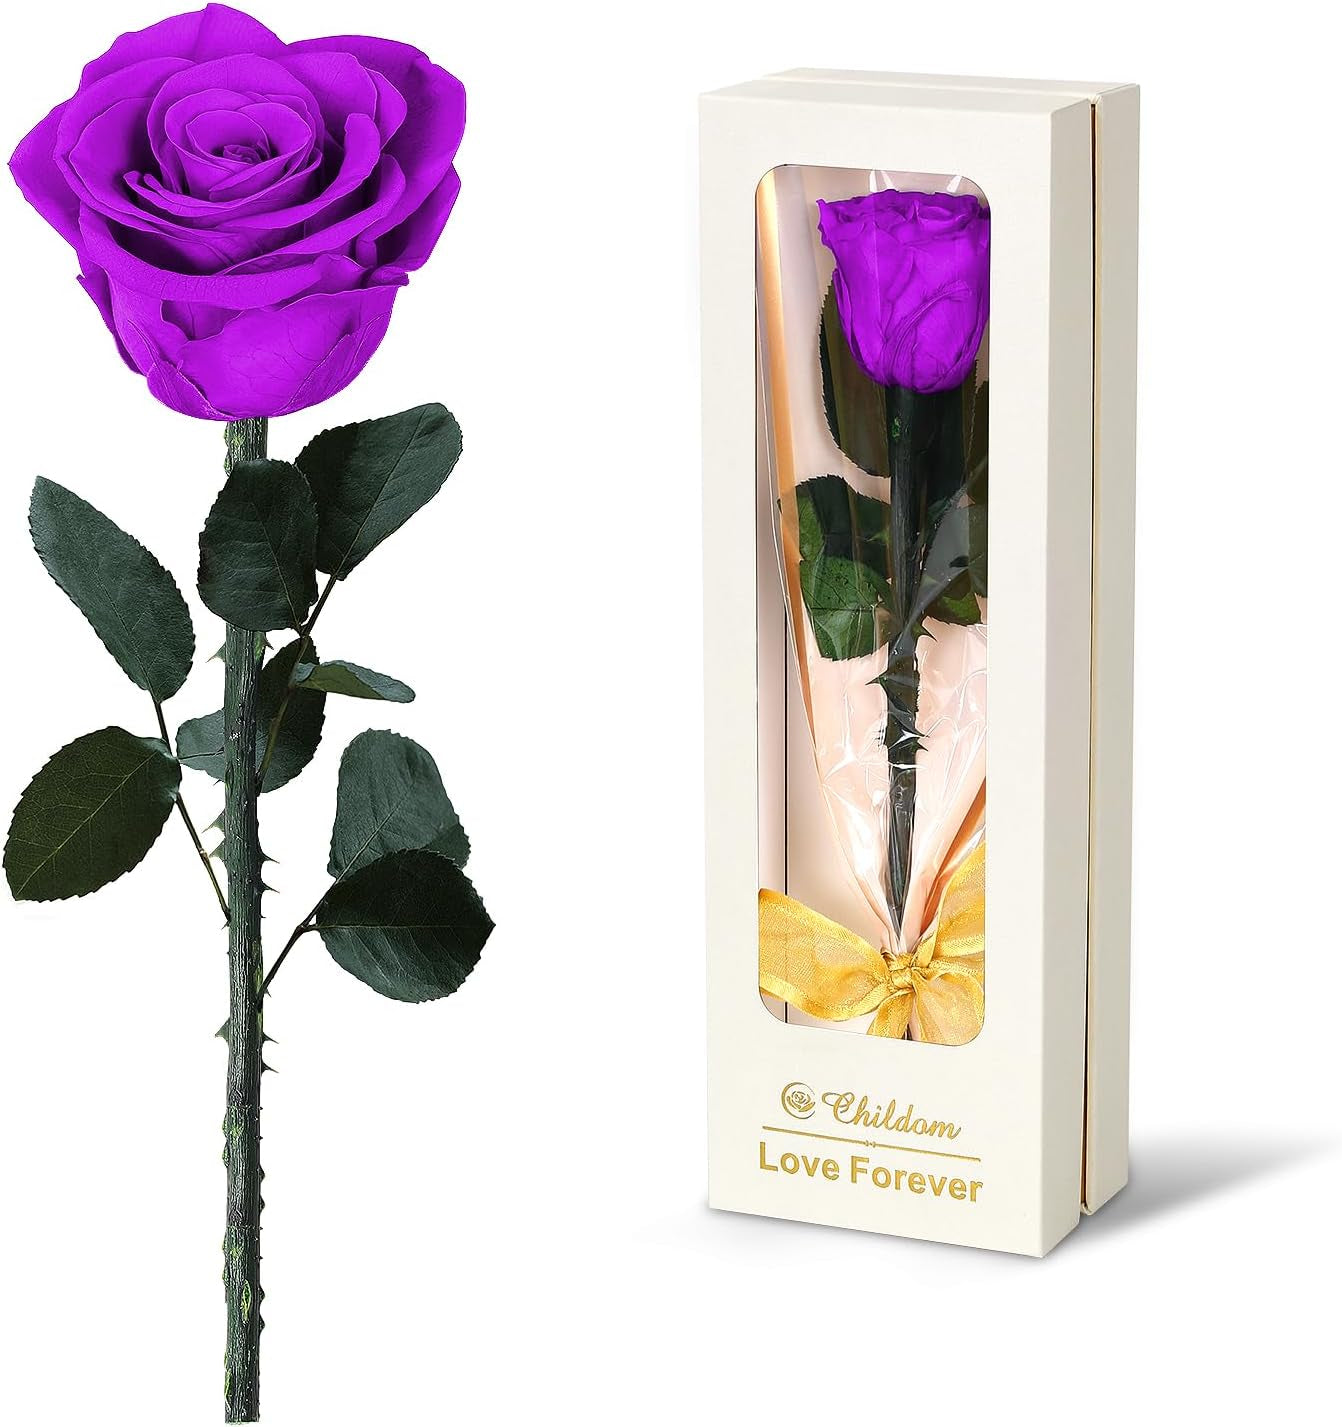 Valentines Day Gifts for Women,Mom Birthday Gifts for Her,Rose Flower Gifts for Mom,Purple Valentines Rose Flower Gifts for Mom from Daughter Son, Valentines Gifts for Wife, Girl, Grandma,Anniversary